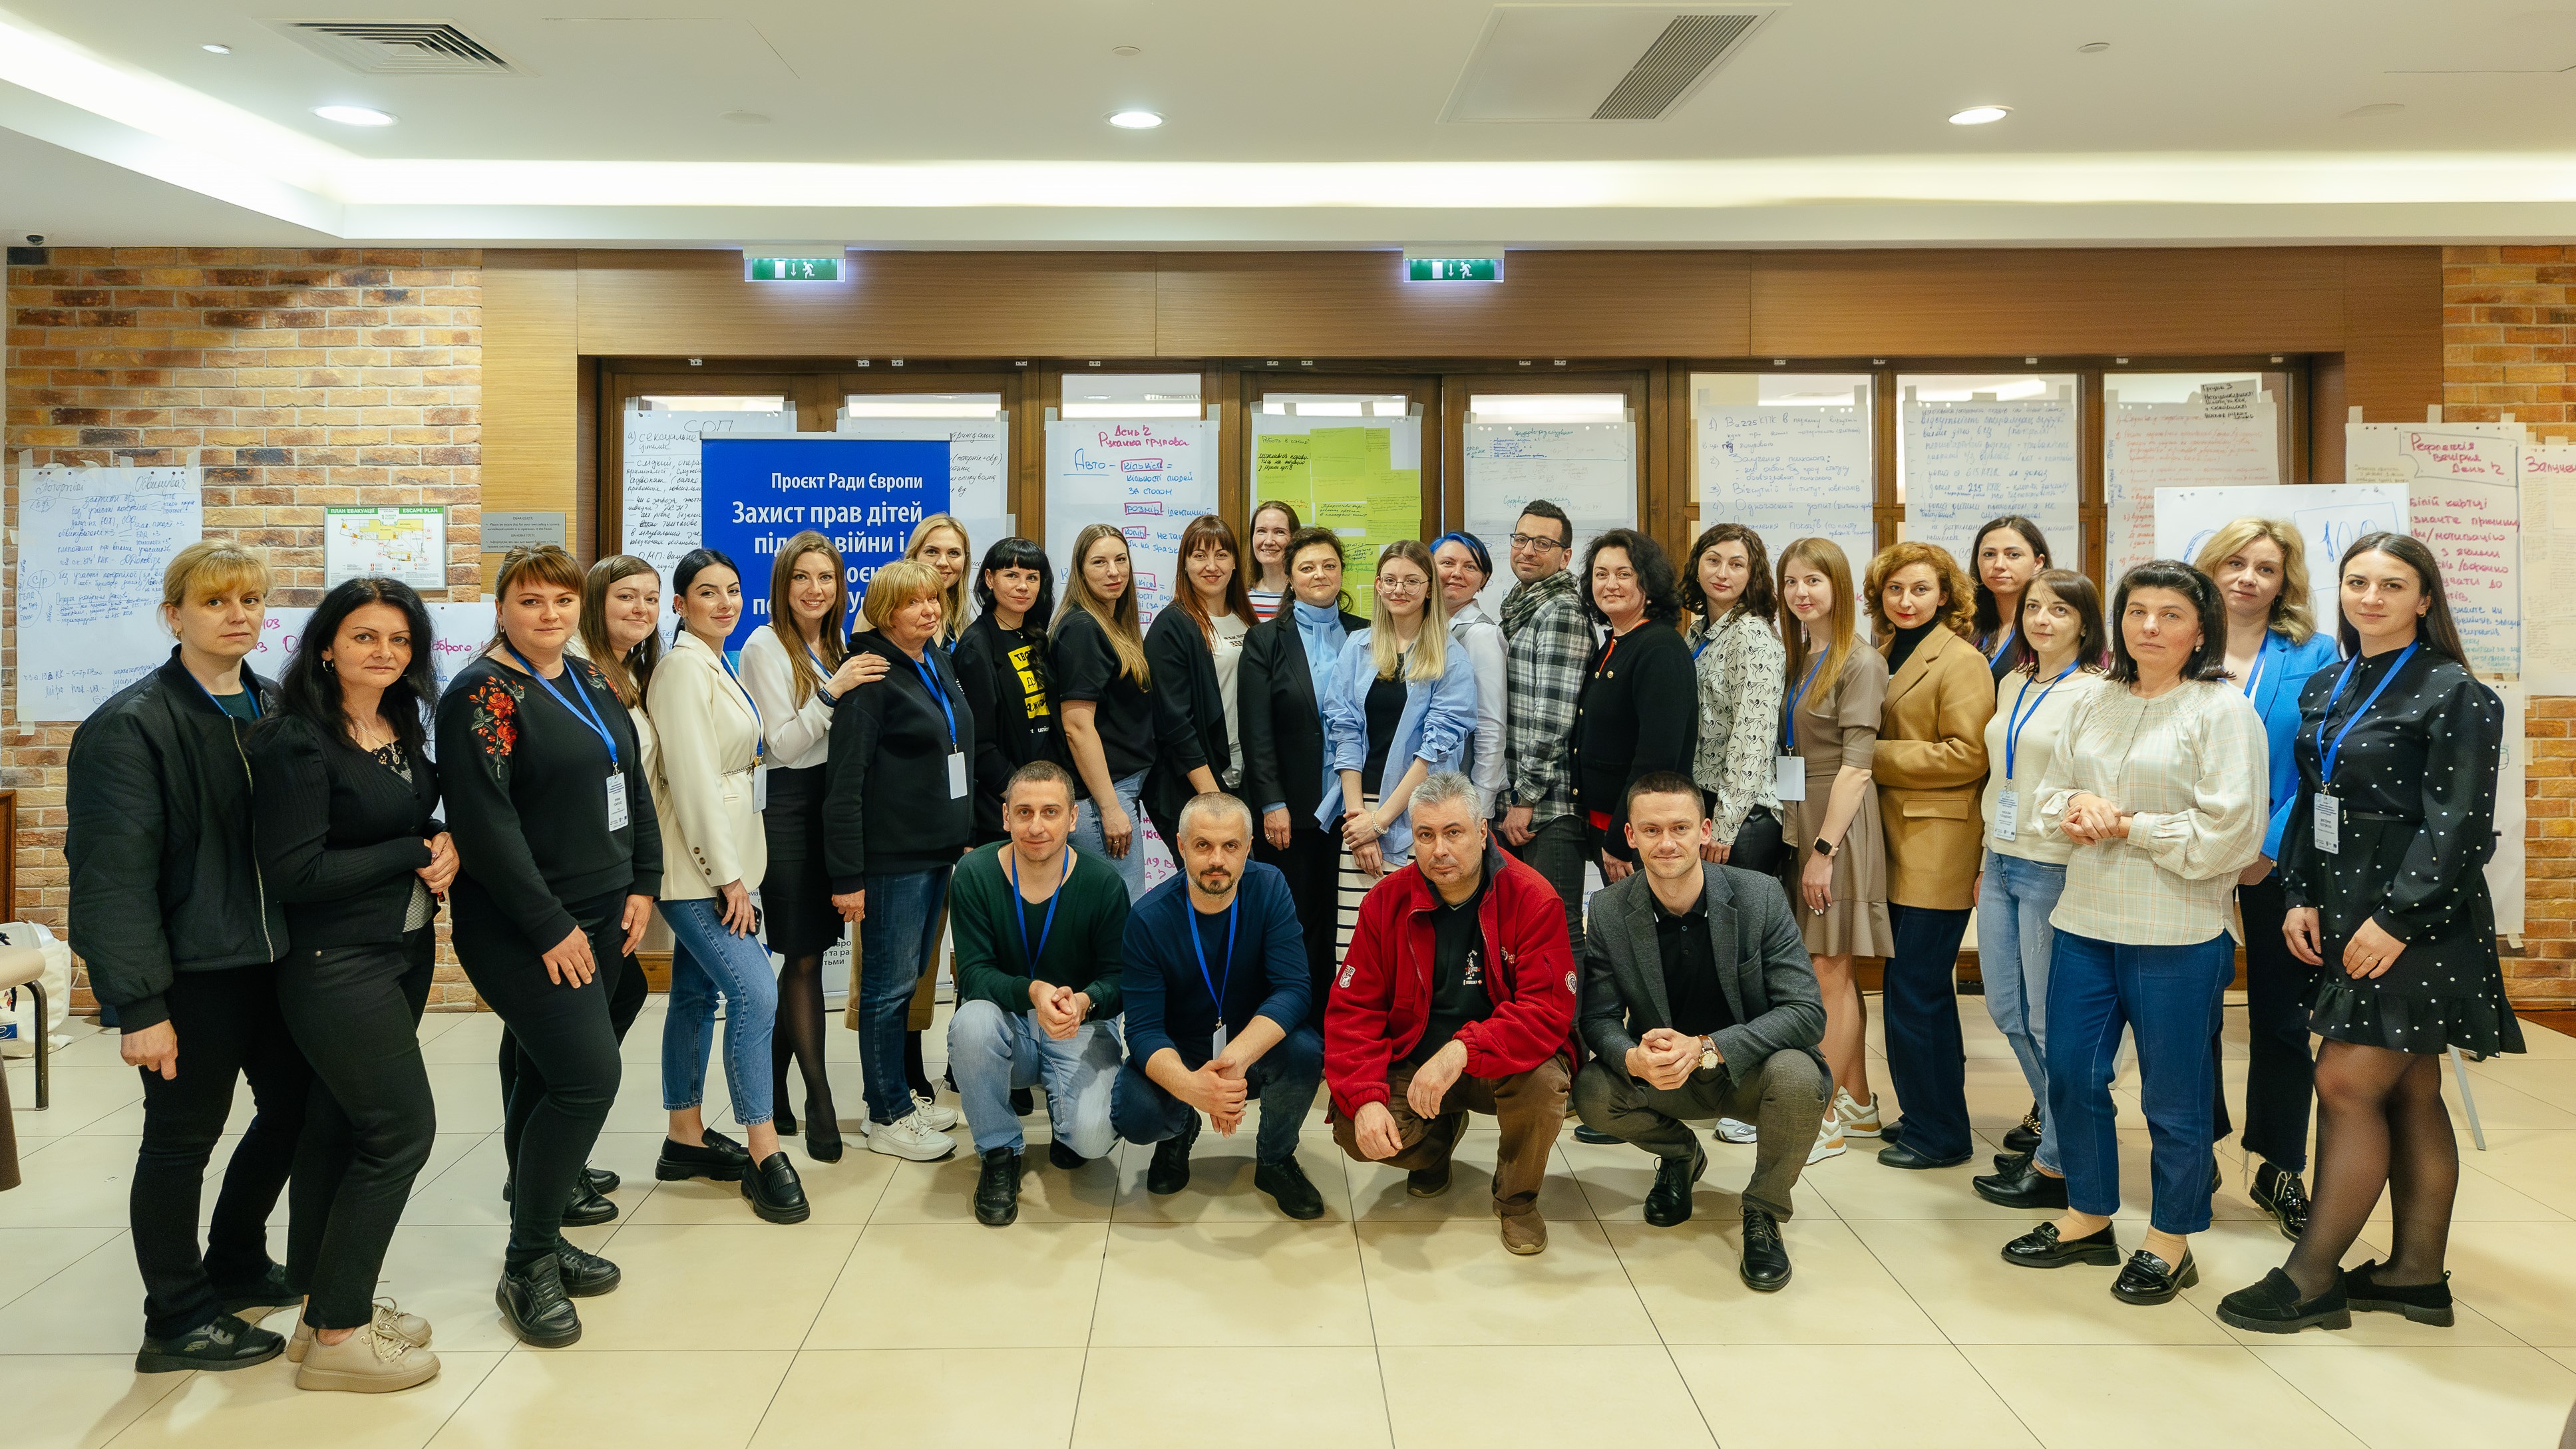 Council of Europe concludes a series of 6 trainings on "Models of effective interagency cooperation in criminal proceedings involving children" in Ukraine